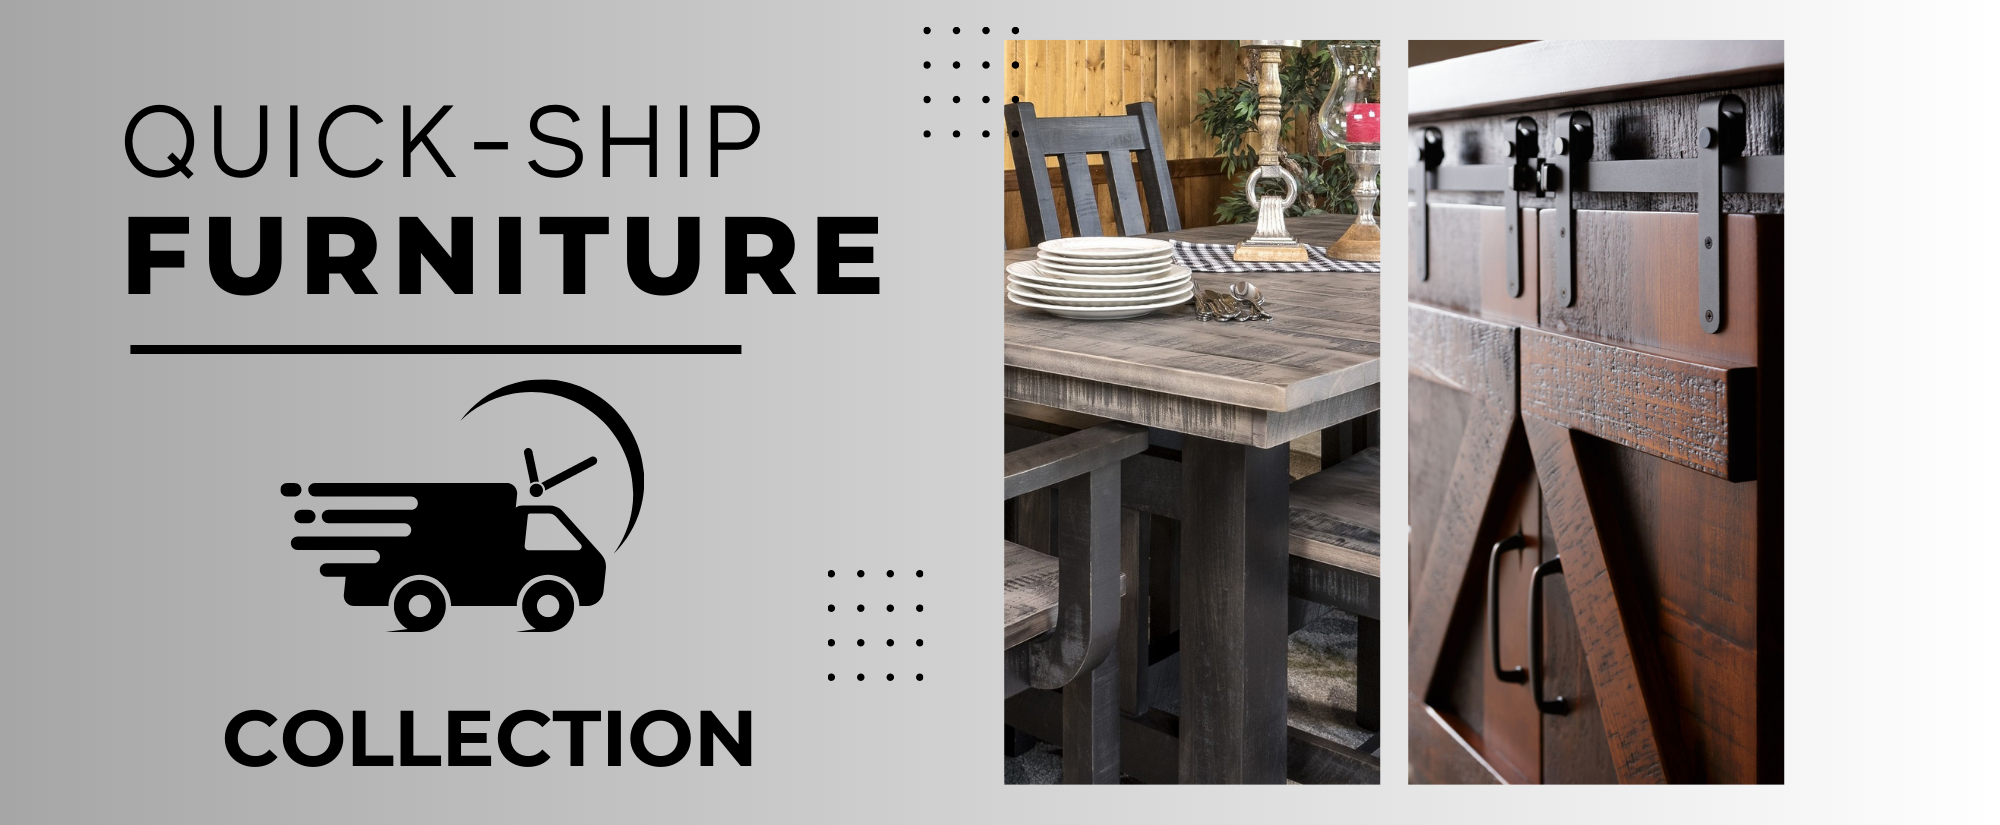 Quick-Ship Furniture Collection